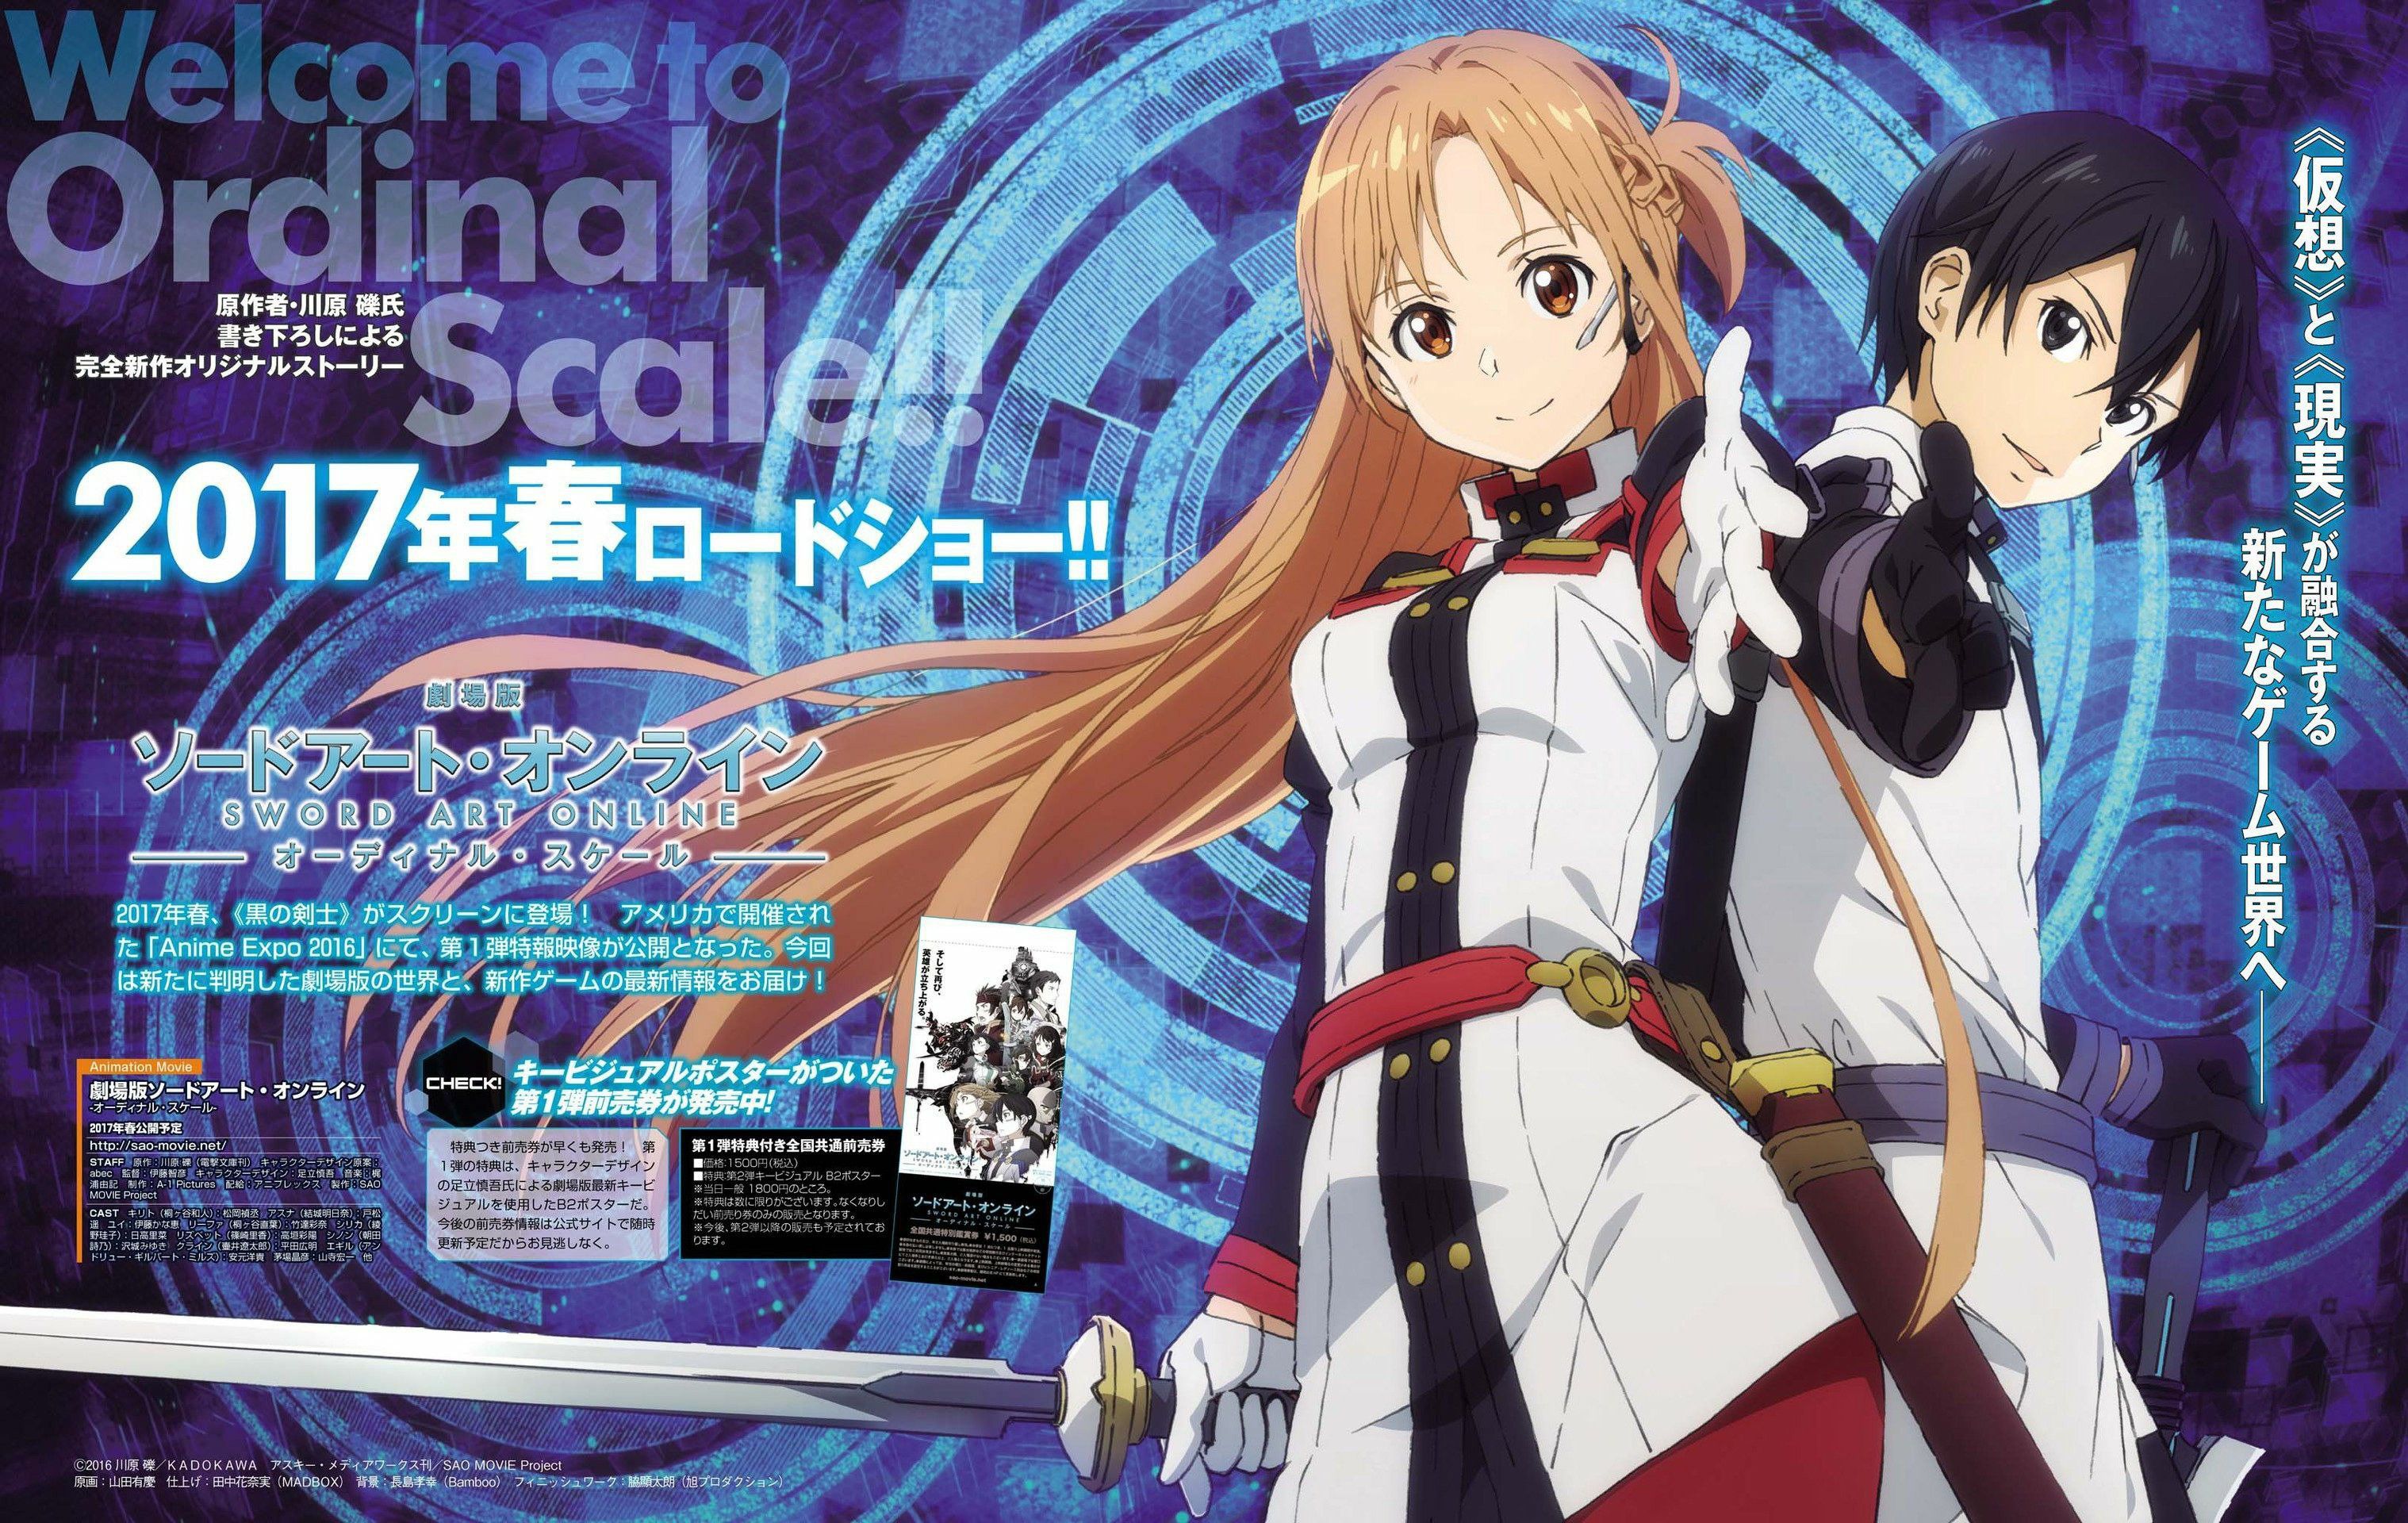 Crunchyroll - Latest Cover Image for the Dengeki's Playstation SAO  Magazine! 🔥 The Sword Art Online: Ordinal Scale movie premieres today in  Japan!